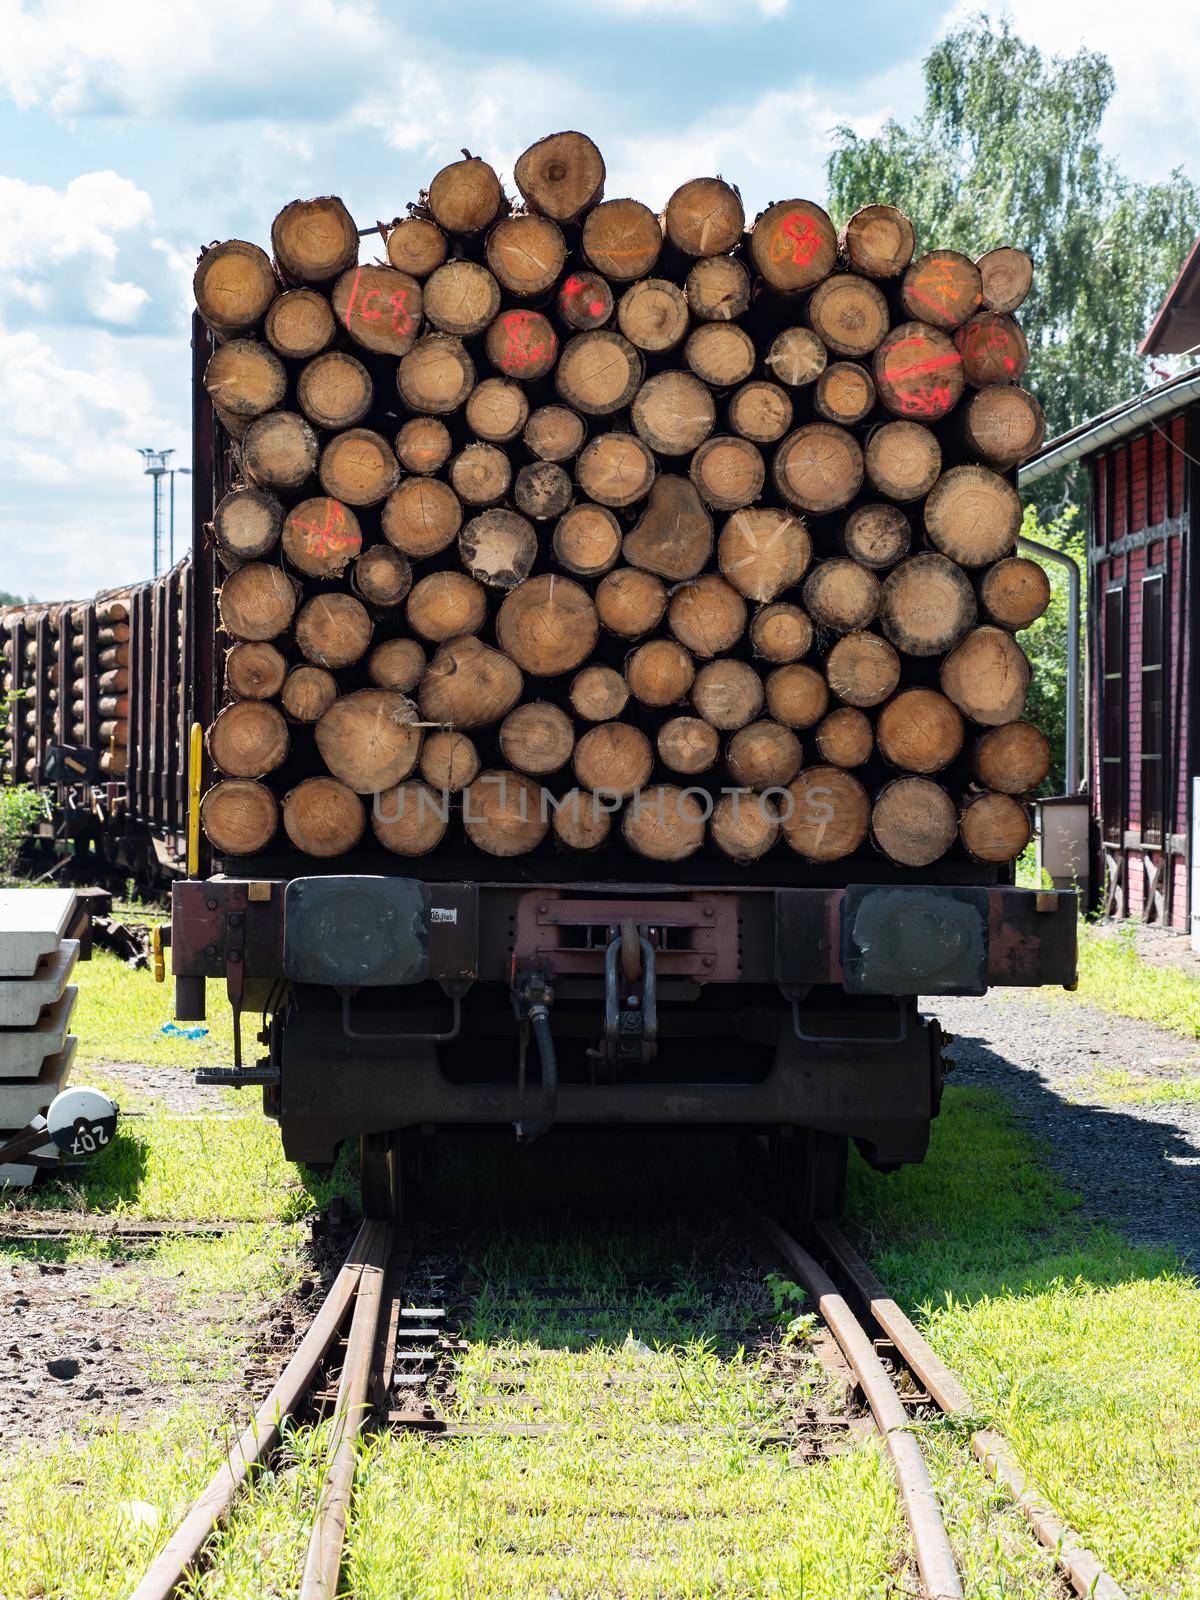 Freight cars loaded with wood logs on railway tracks.  by rdonar2